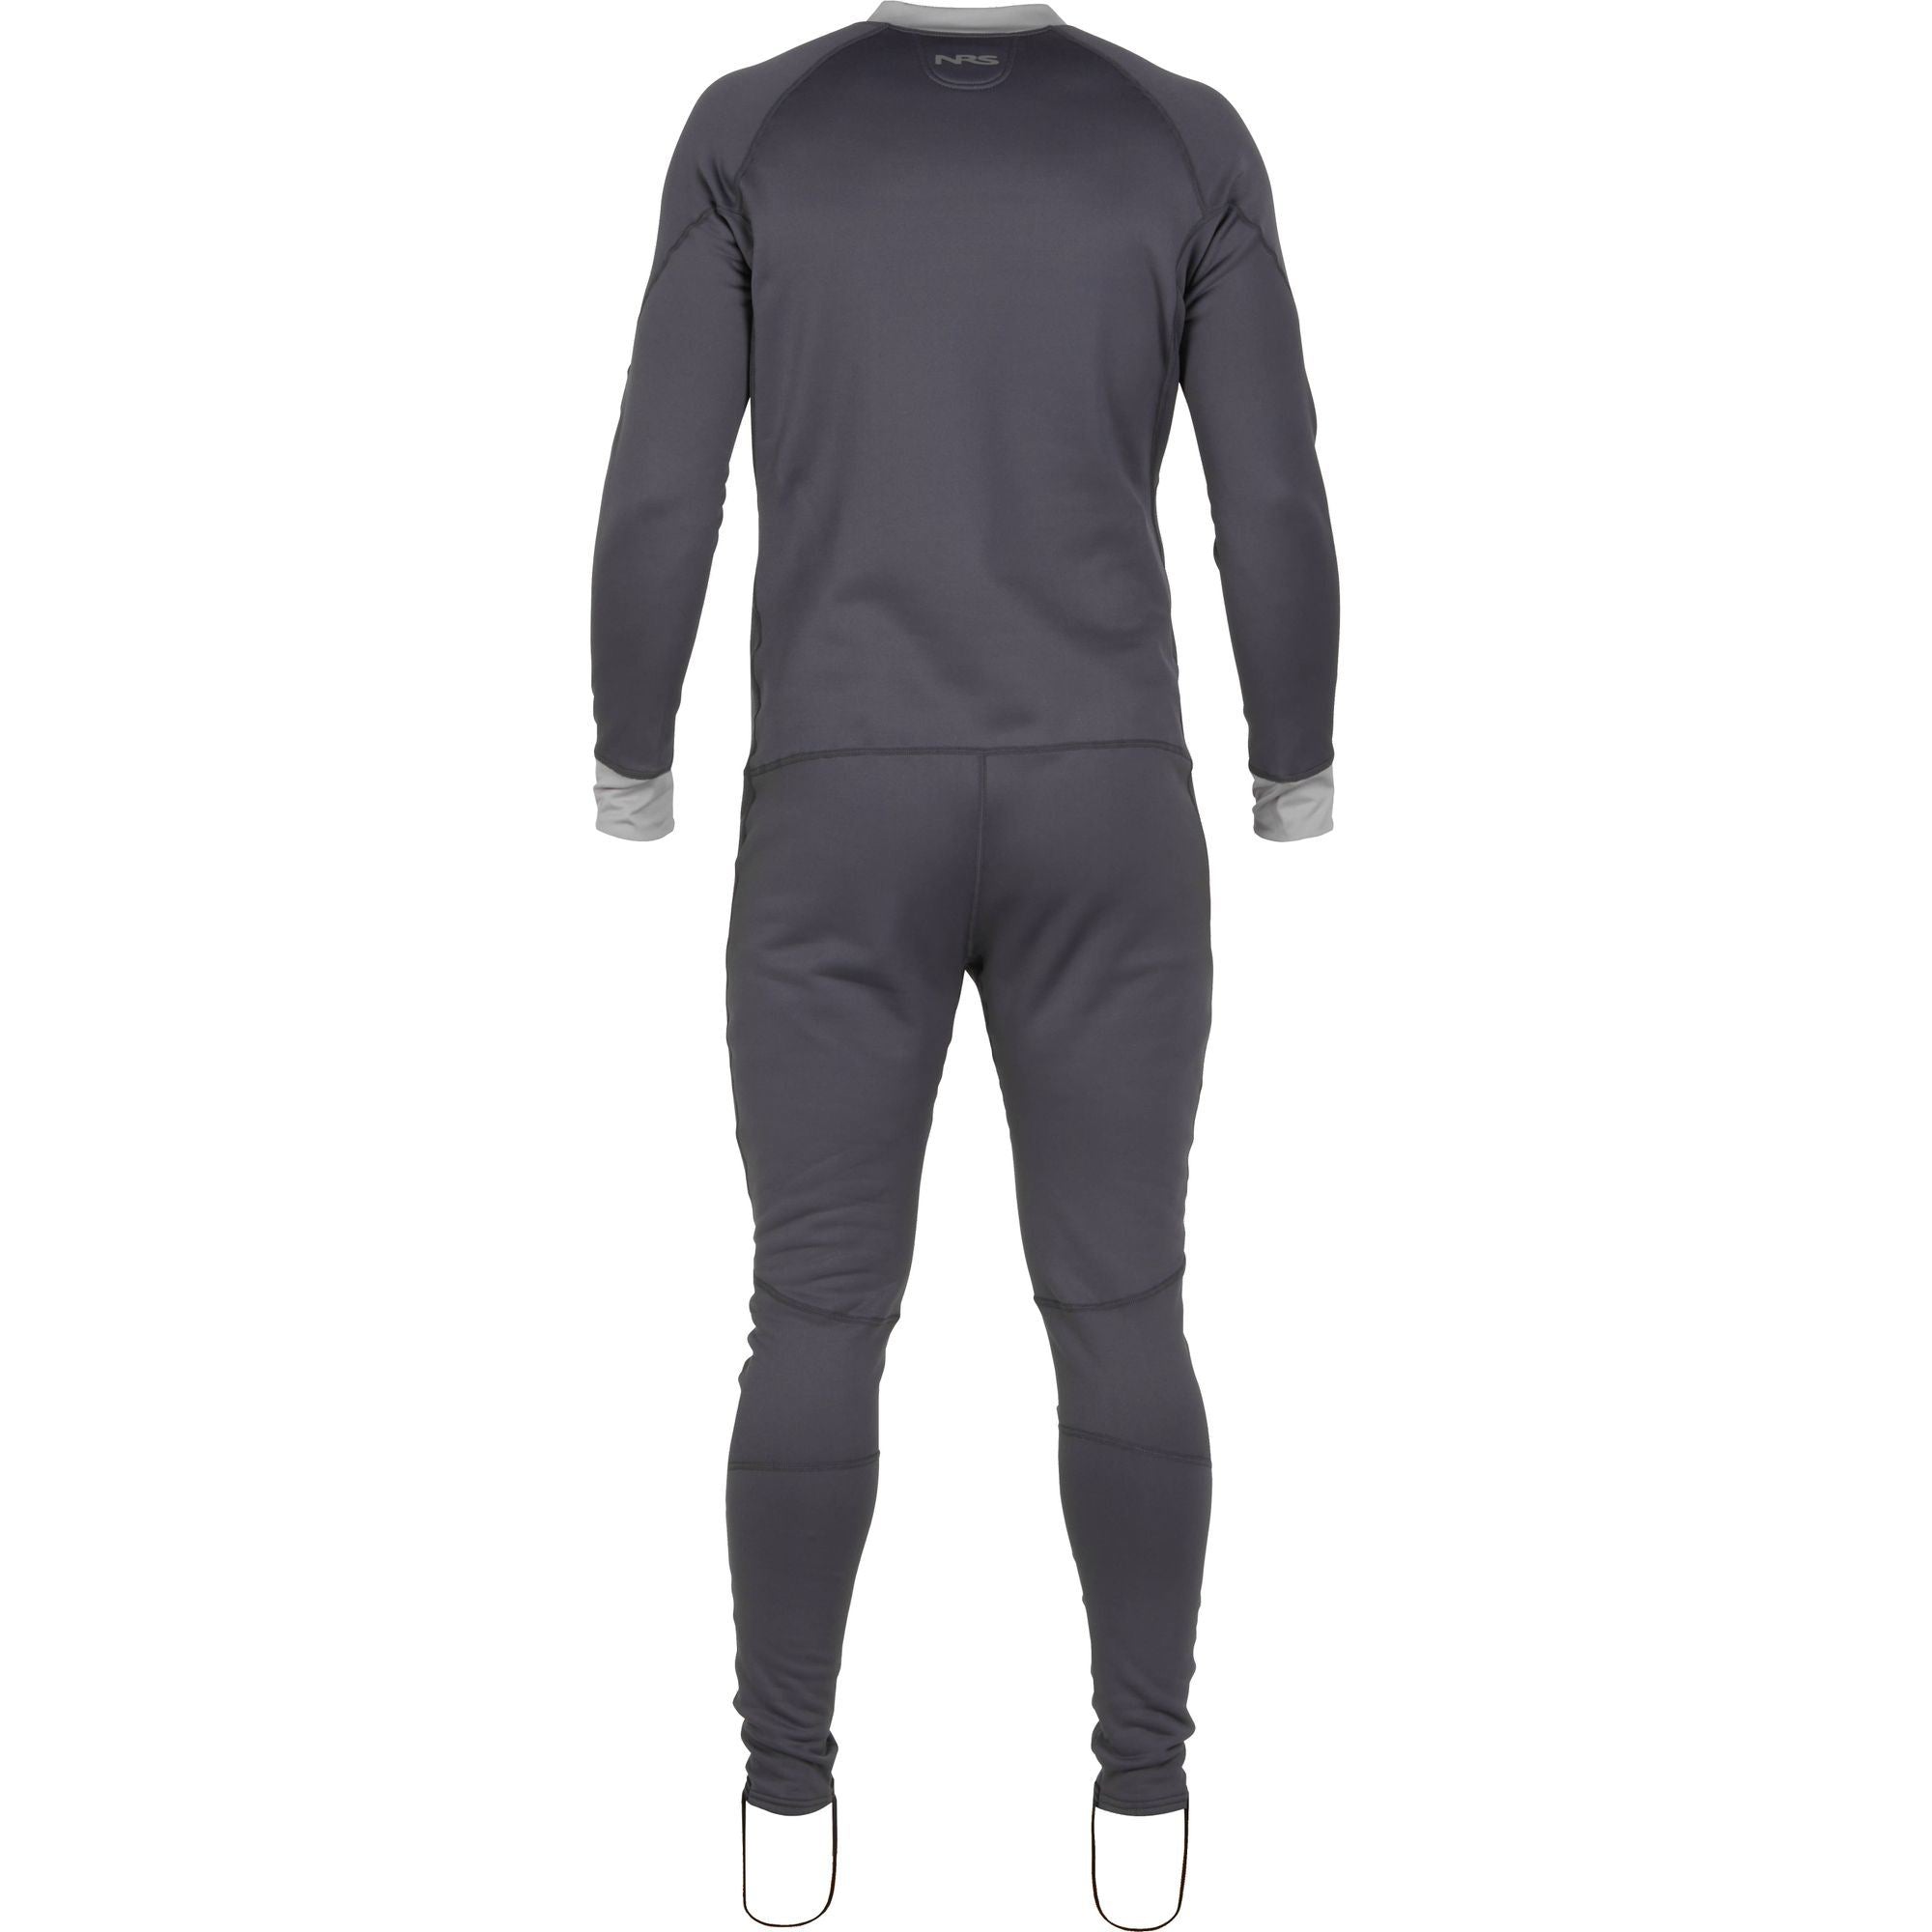 NRS Expedition Weight Union Suit, Herre